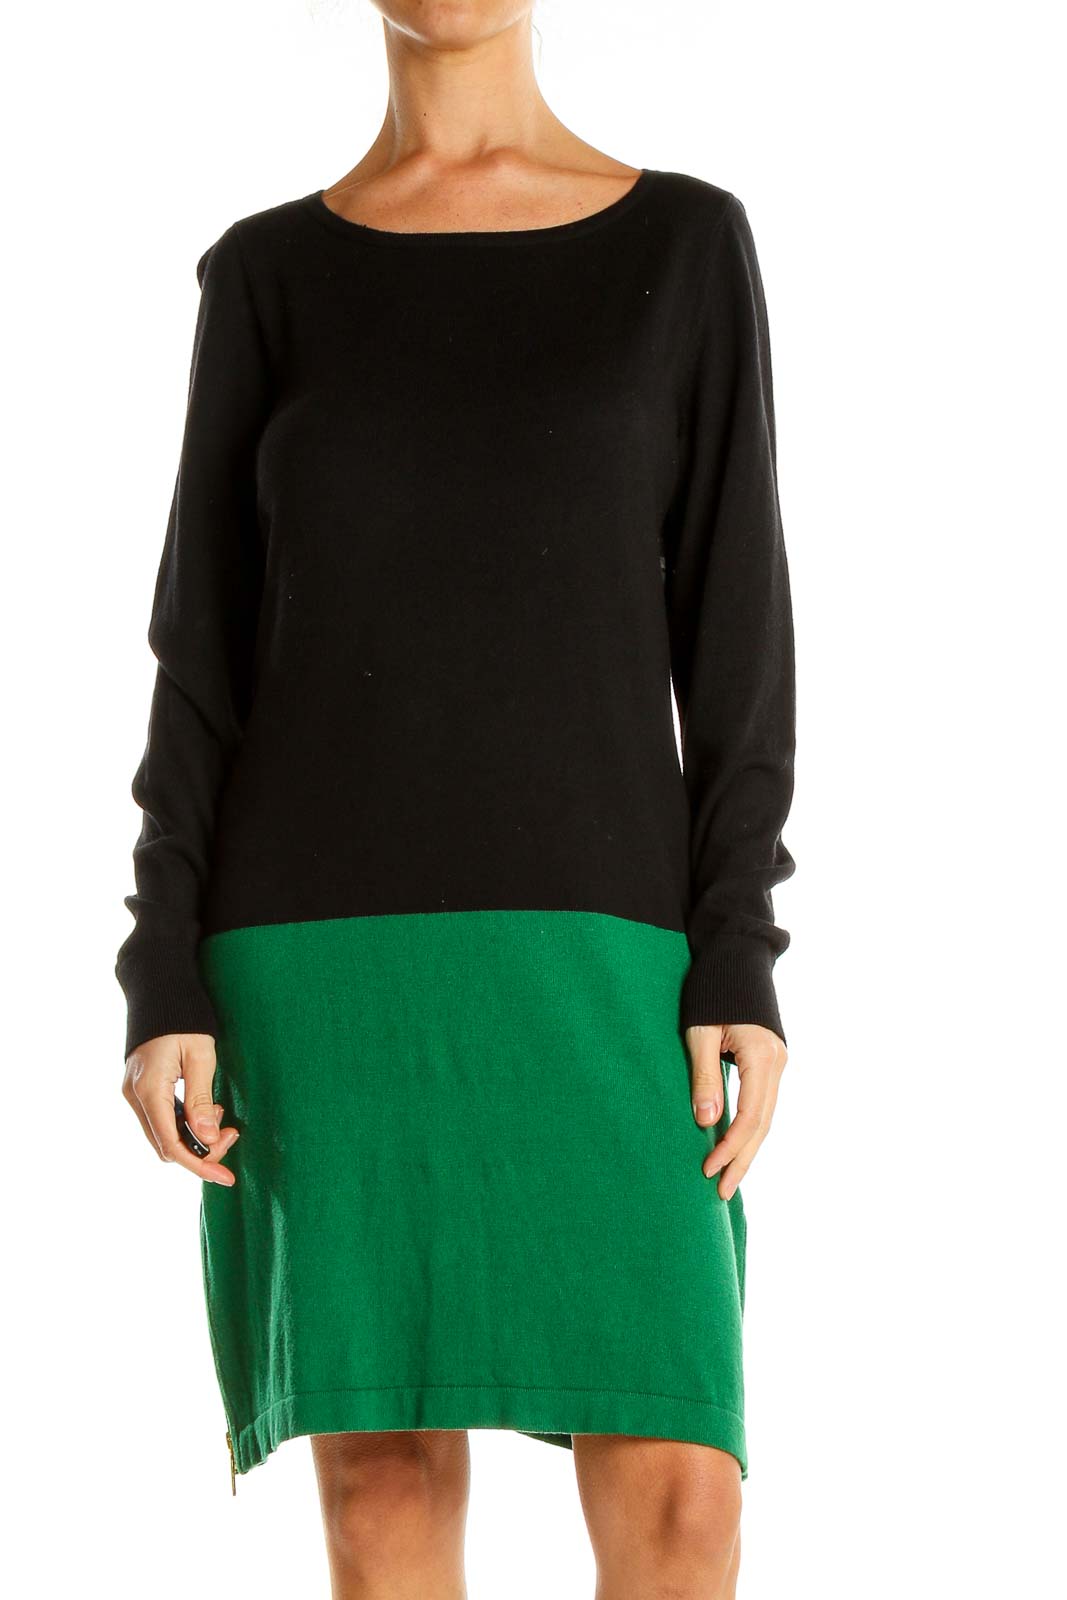 Black Green Colorblock Classic Sweater Dress Front